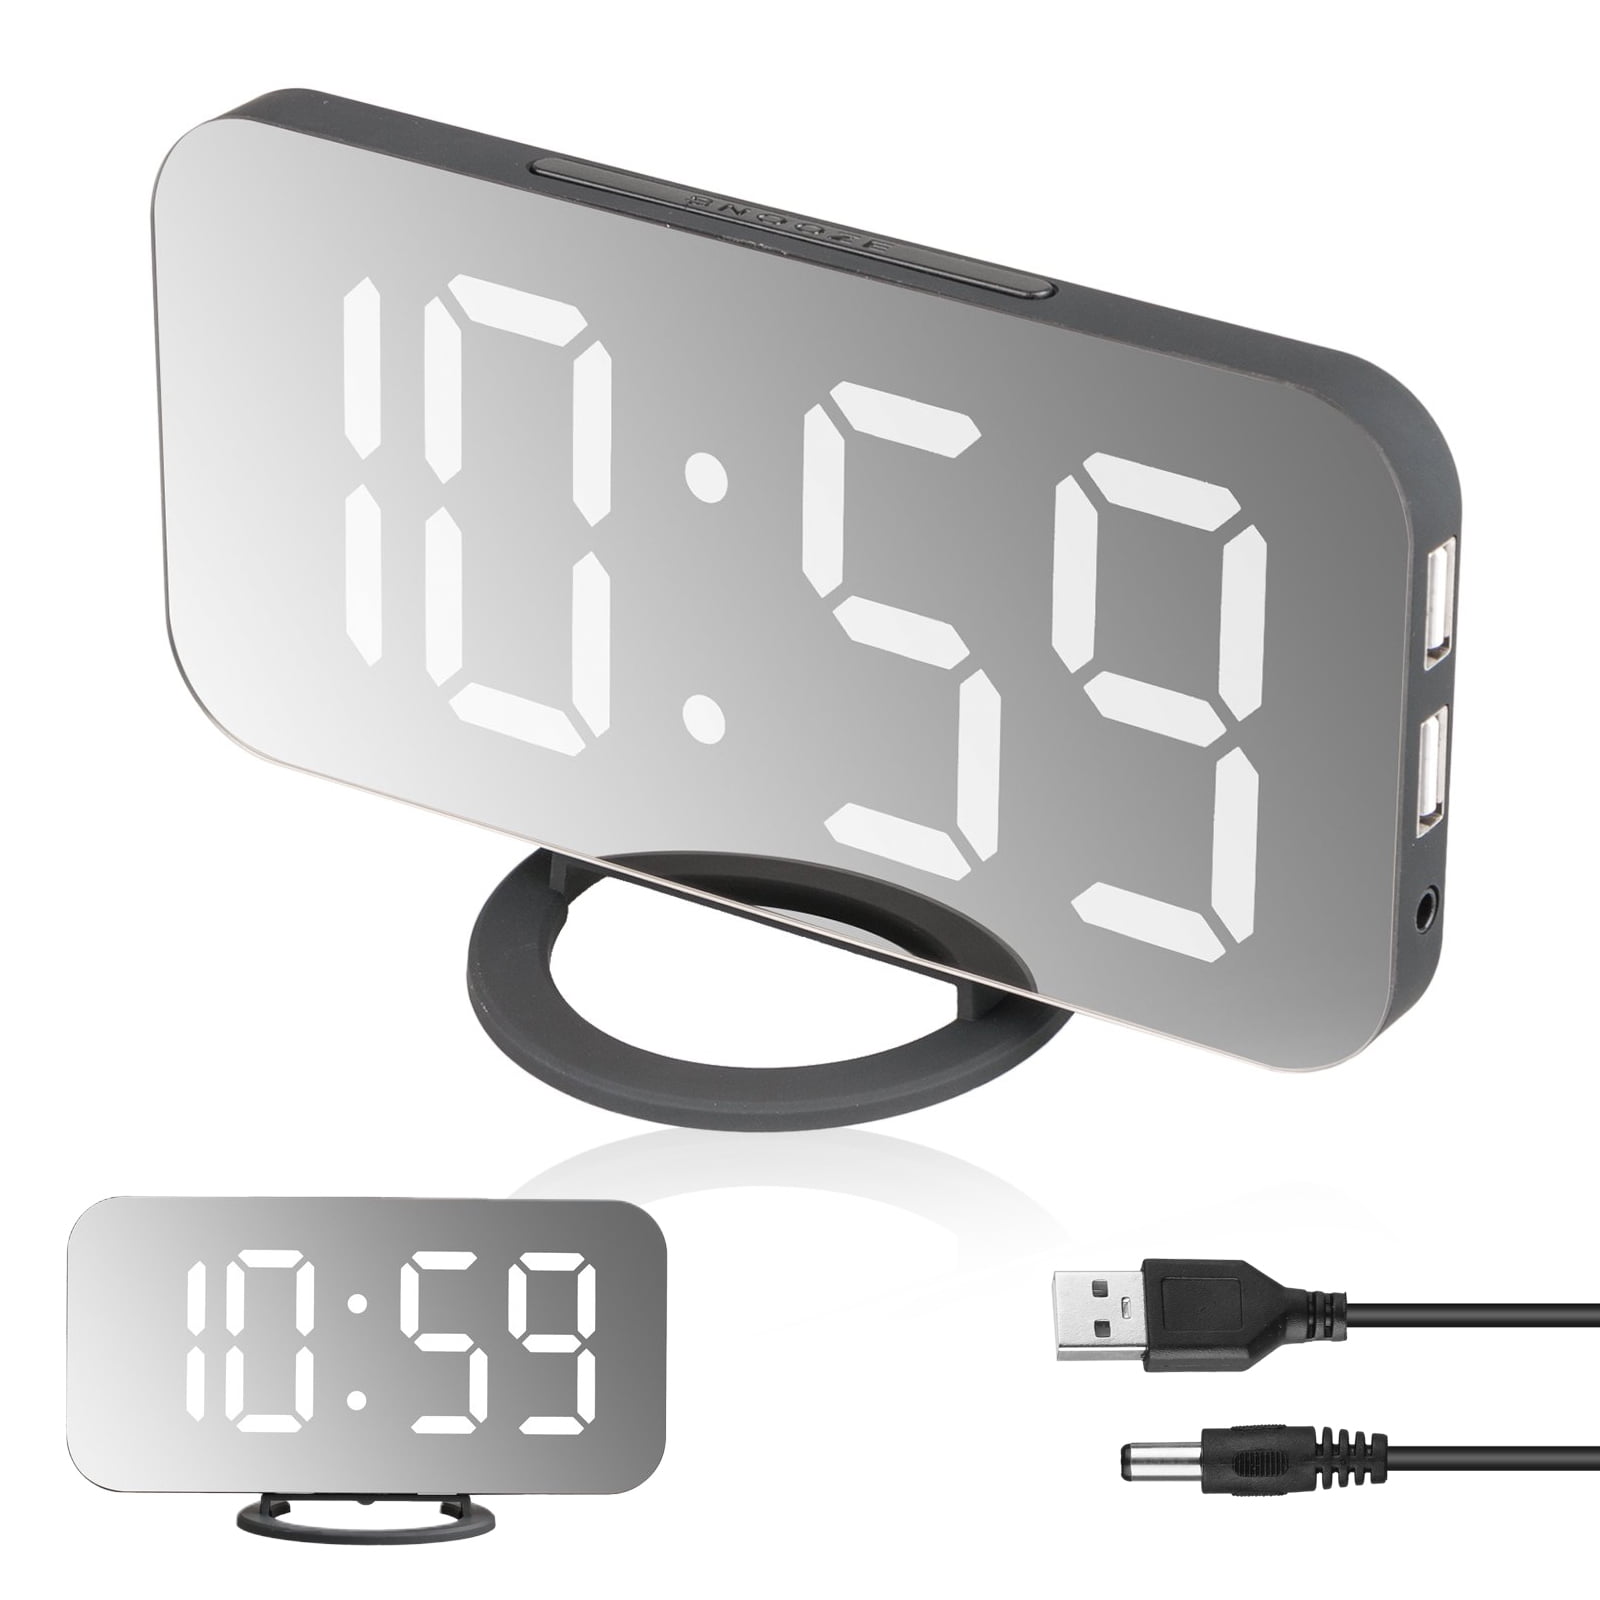 Digital Alarm Clock 7 LED Mirror Electronic Display With USB Charger T62 